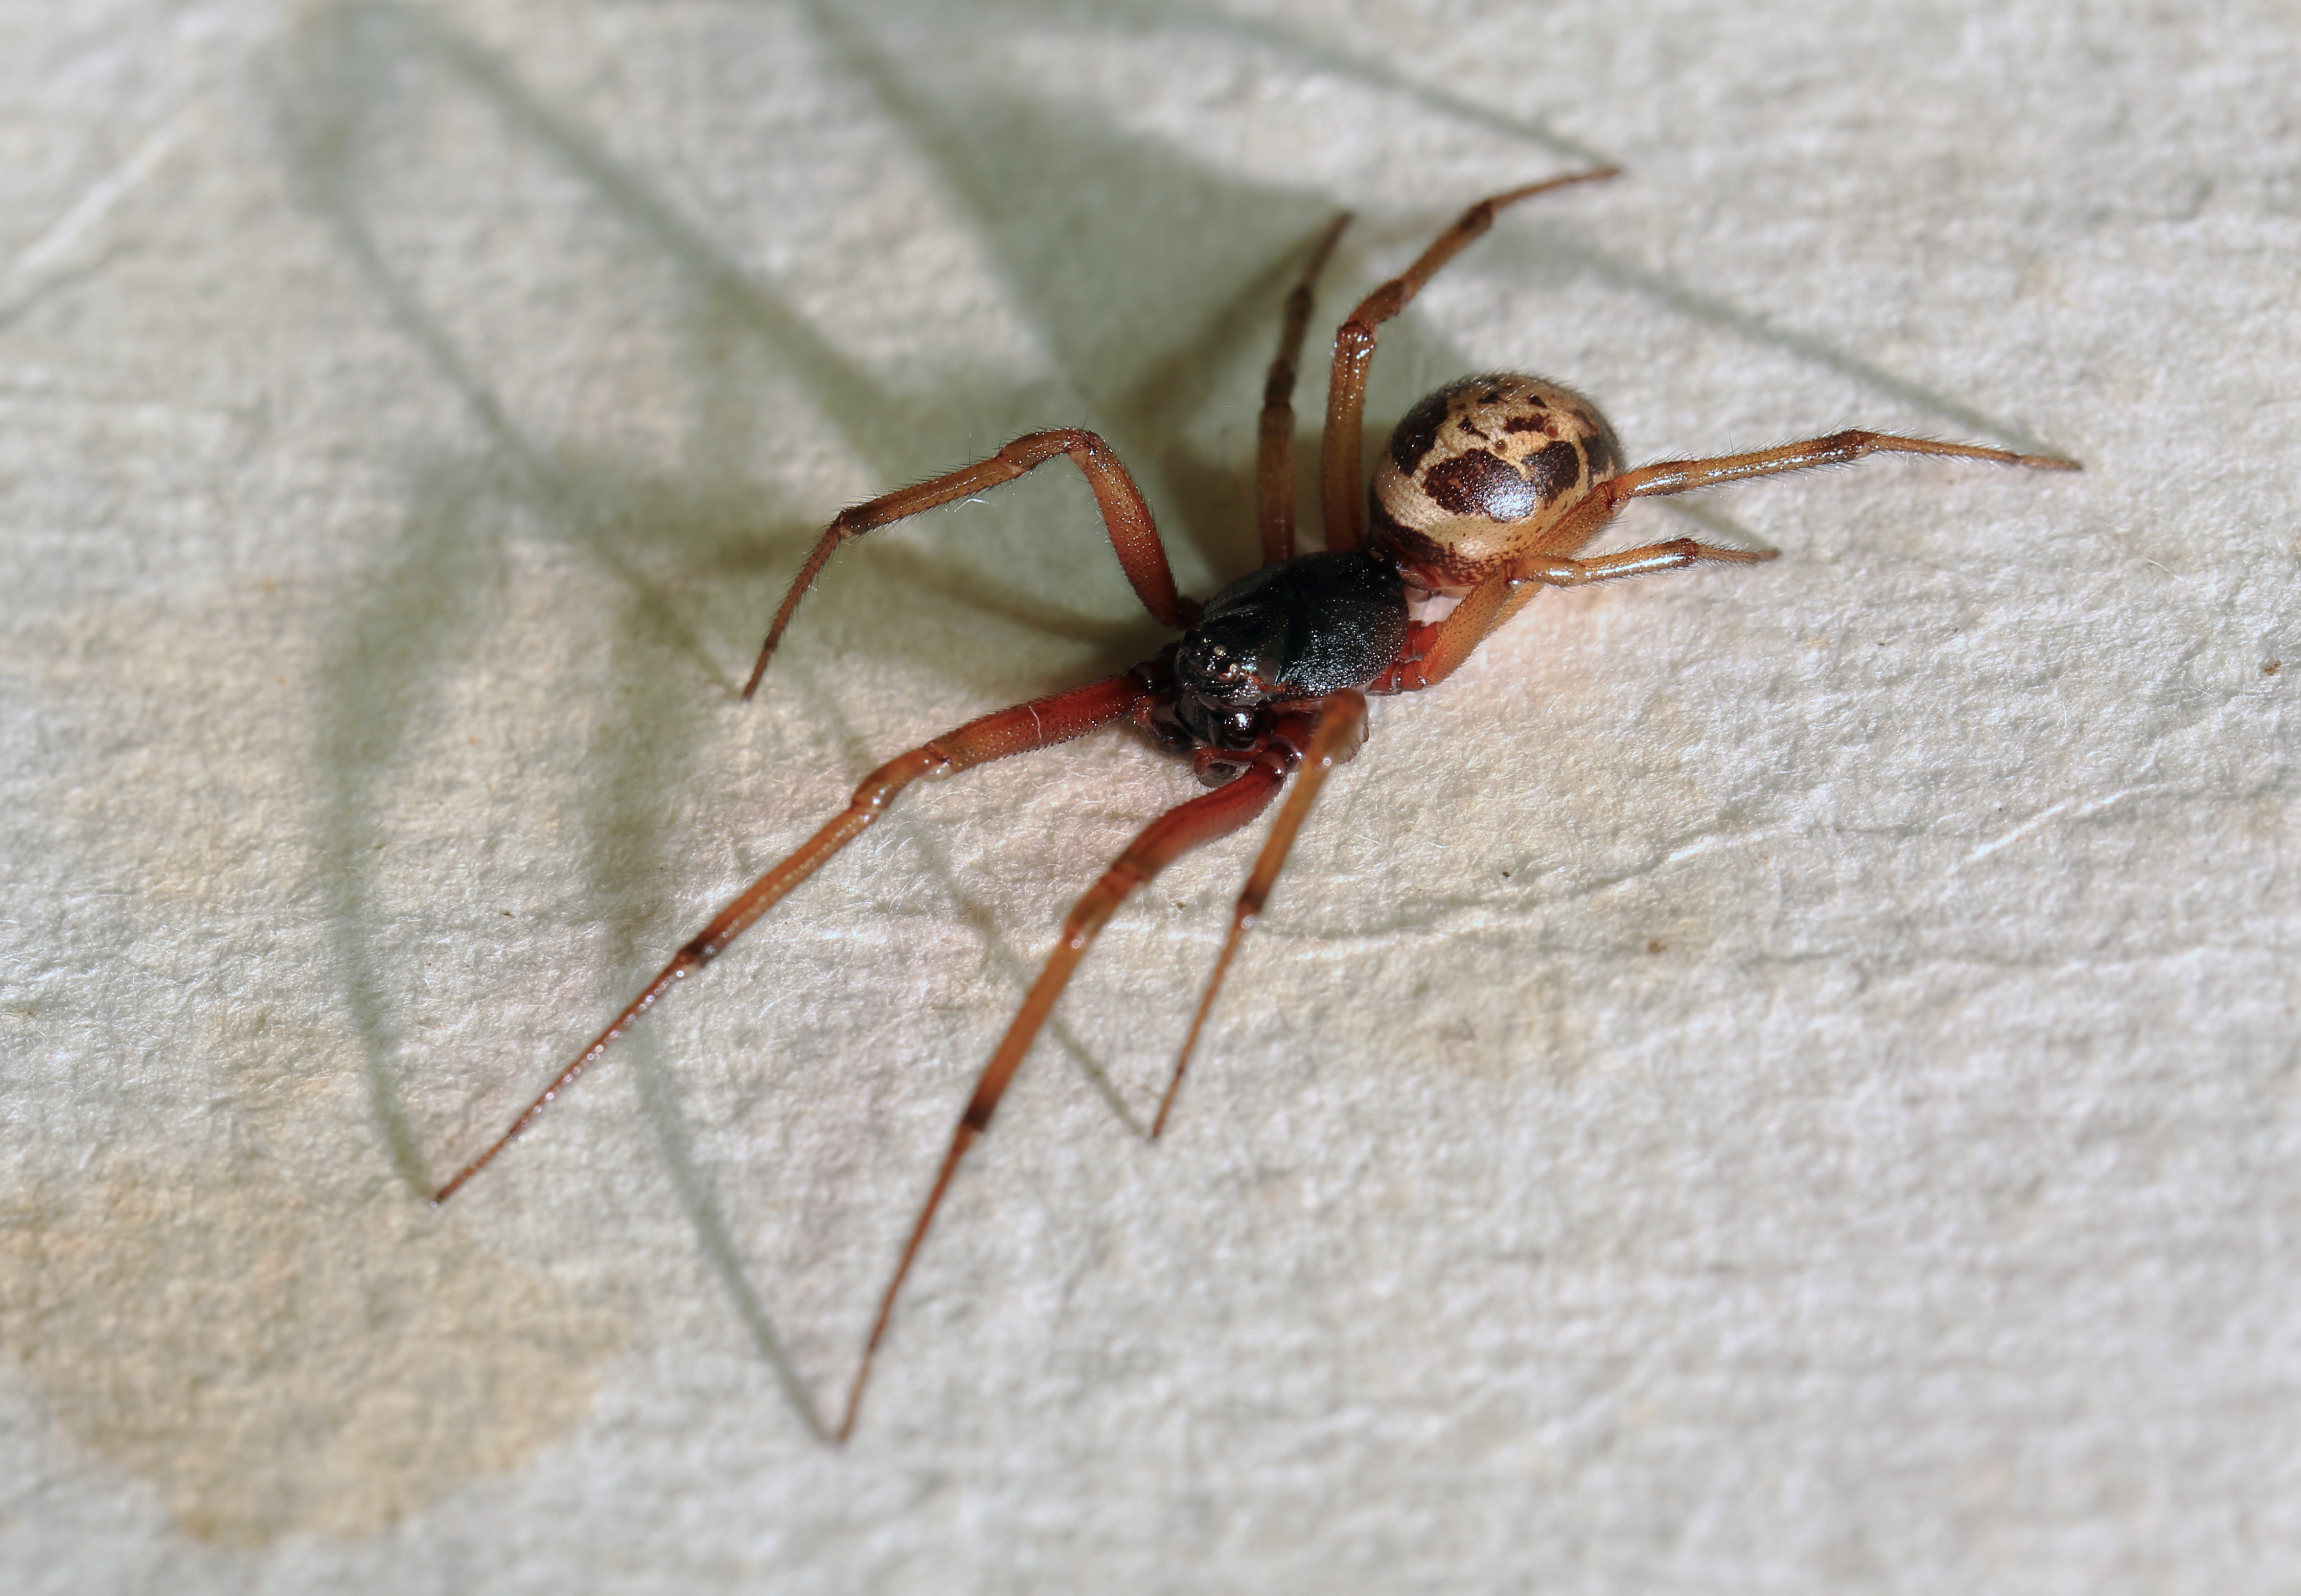 A second school has been closed by a sighting of false widow spiders in one month